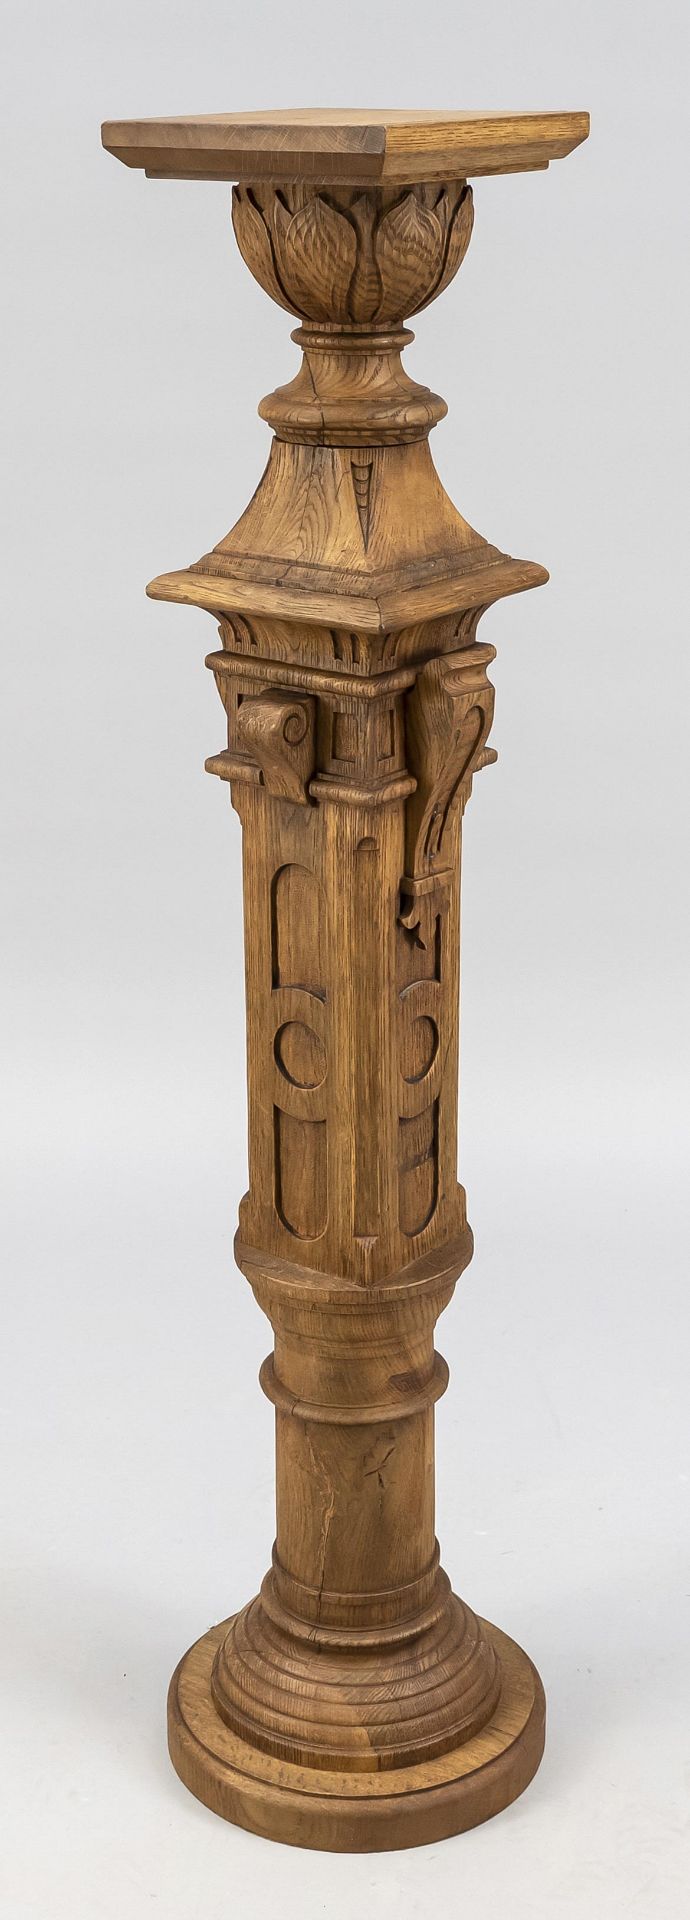 Large floral column, 20th c., oak. Balustrated and coffered, vase capitals (lotus?), h. cm